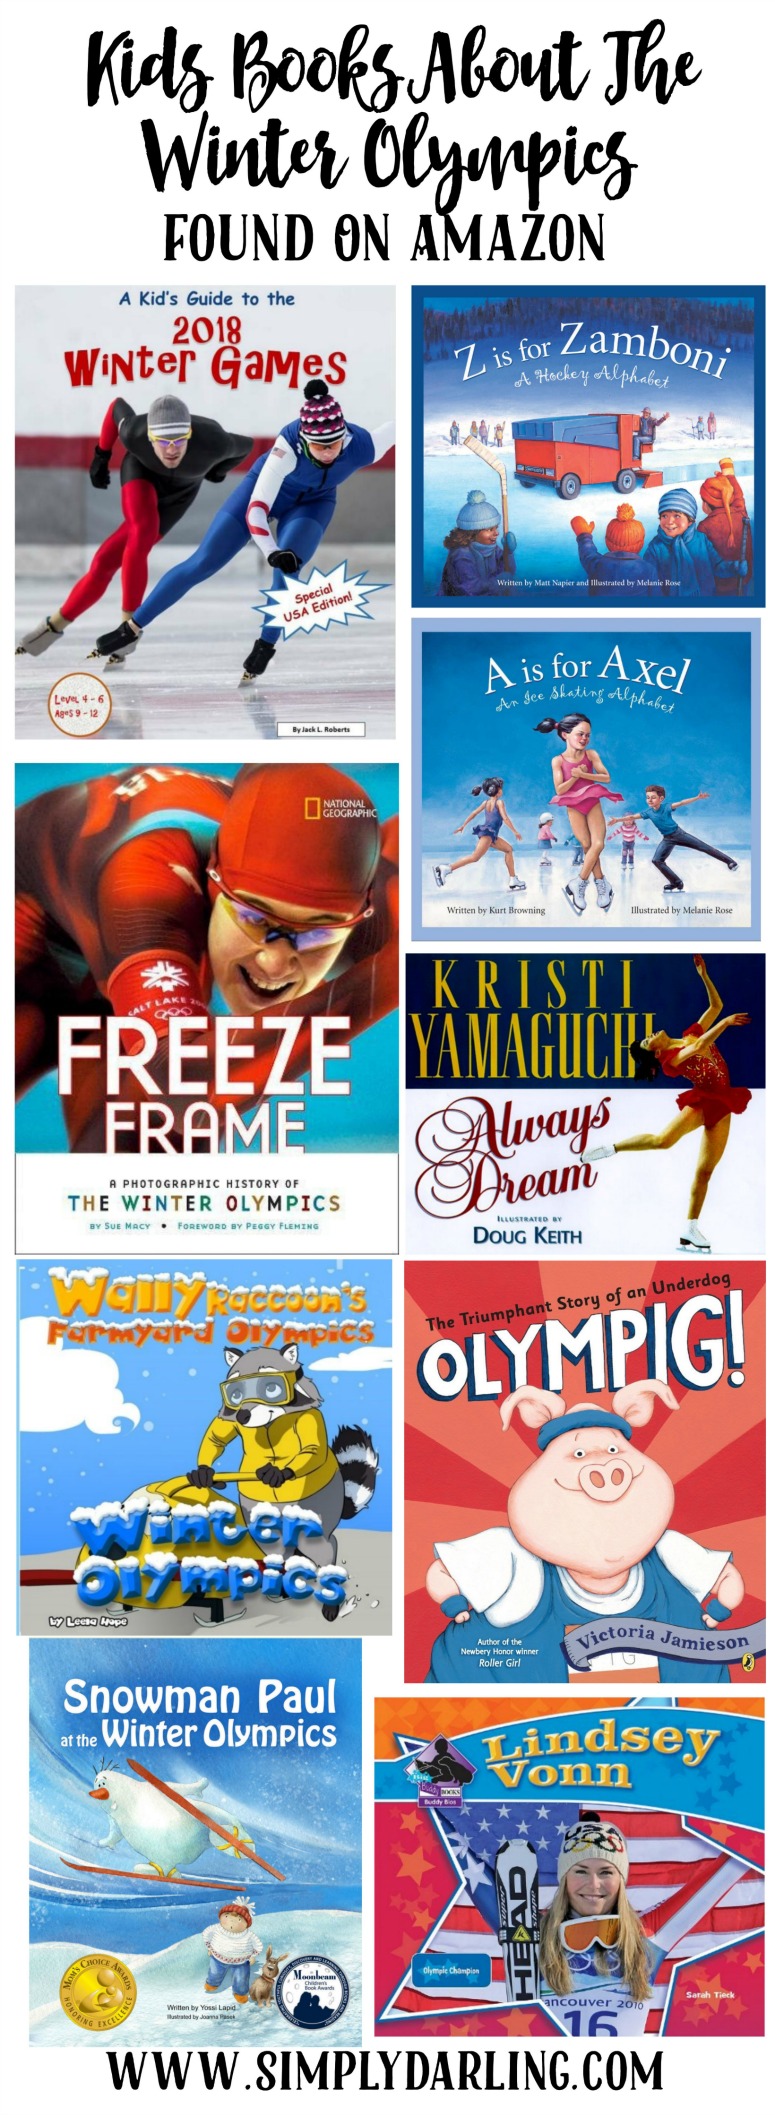 Kids Books about the winter olympics